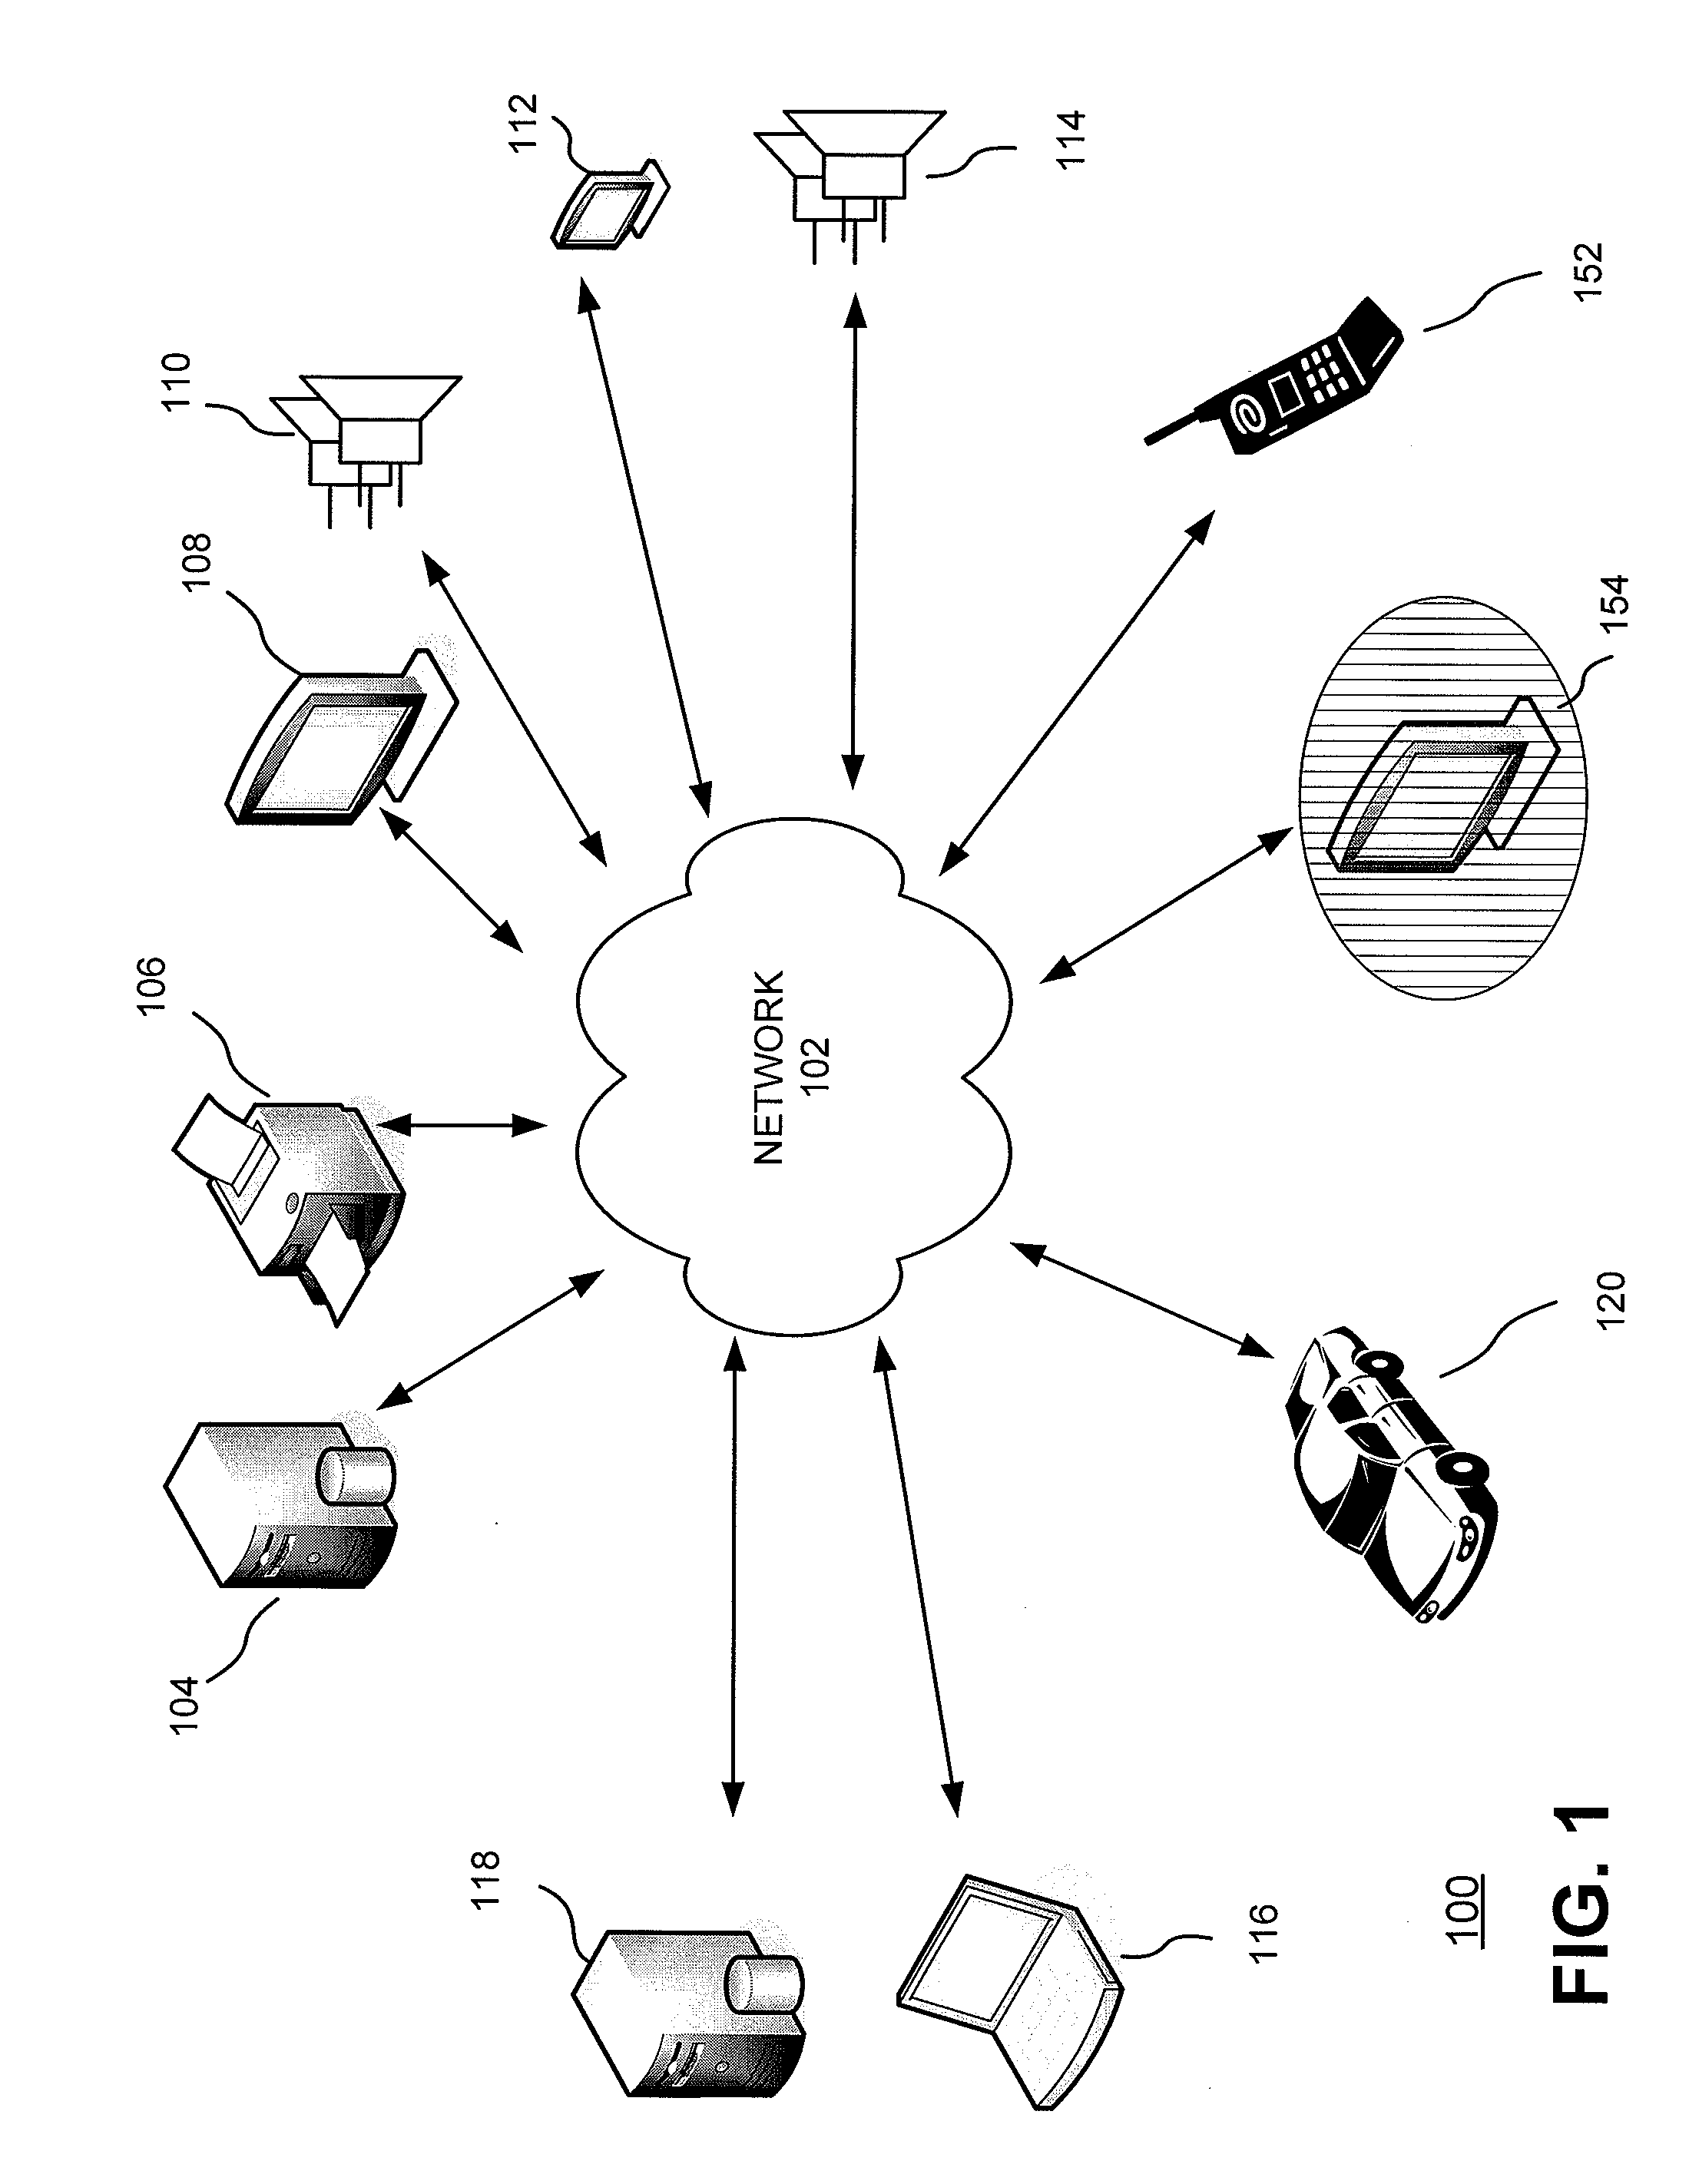 Providing services to a guest device in a personal network